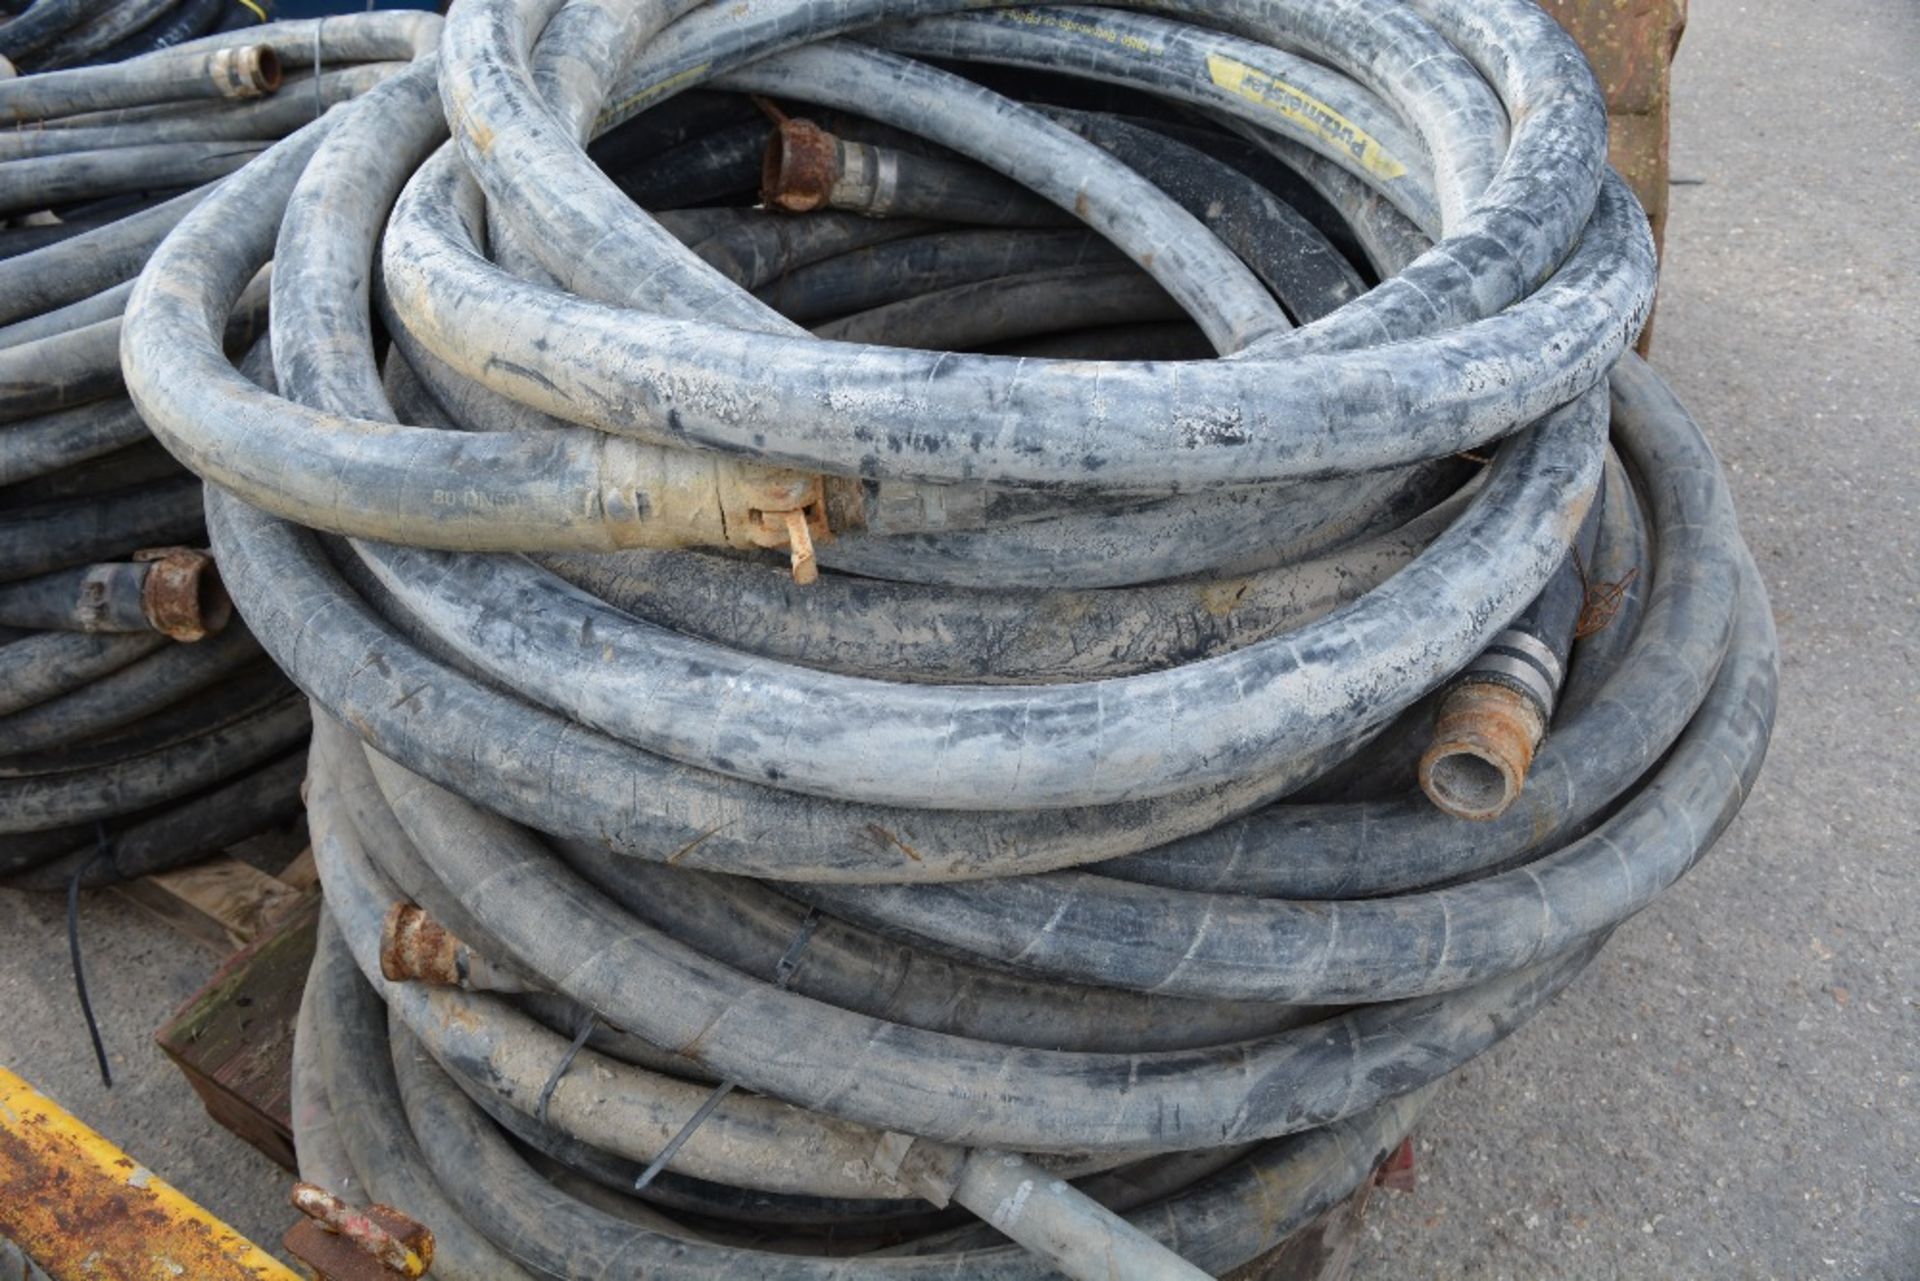 ASSORTED GROUT / SCREED PIPES (1 PALLET), ID: PL-15664, RUISLIP PLANT HIRE LTD. *UNRESERVED* - Image 2 of 3